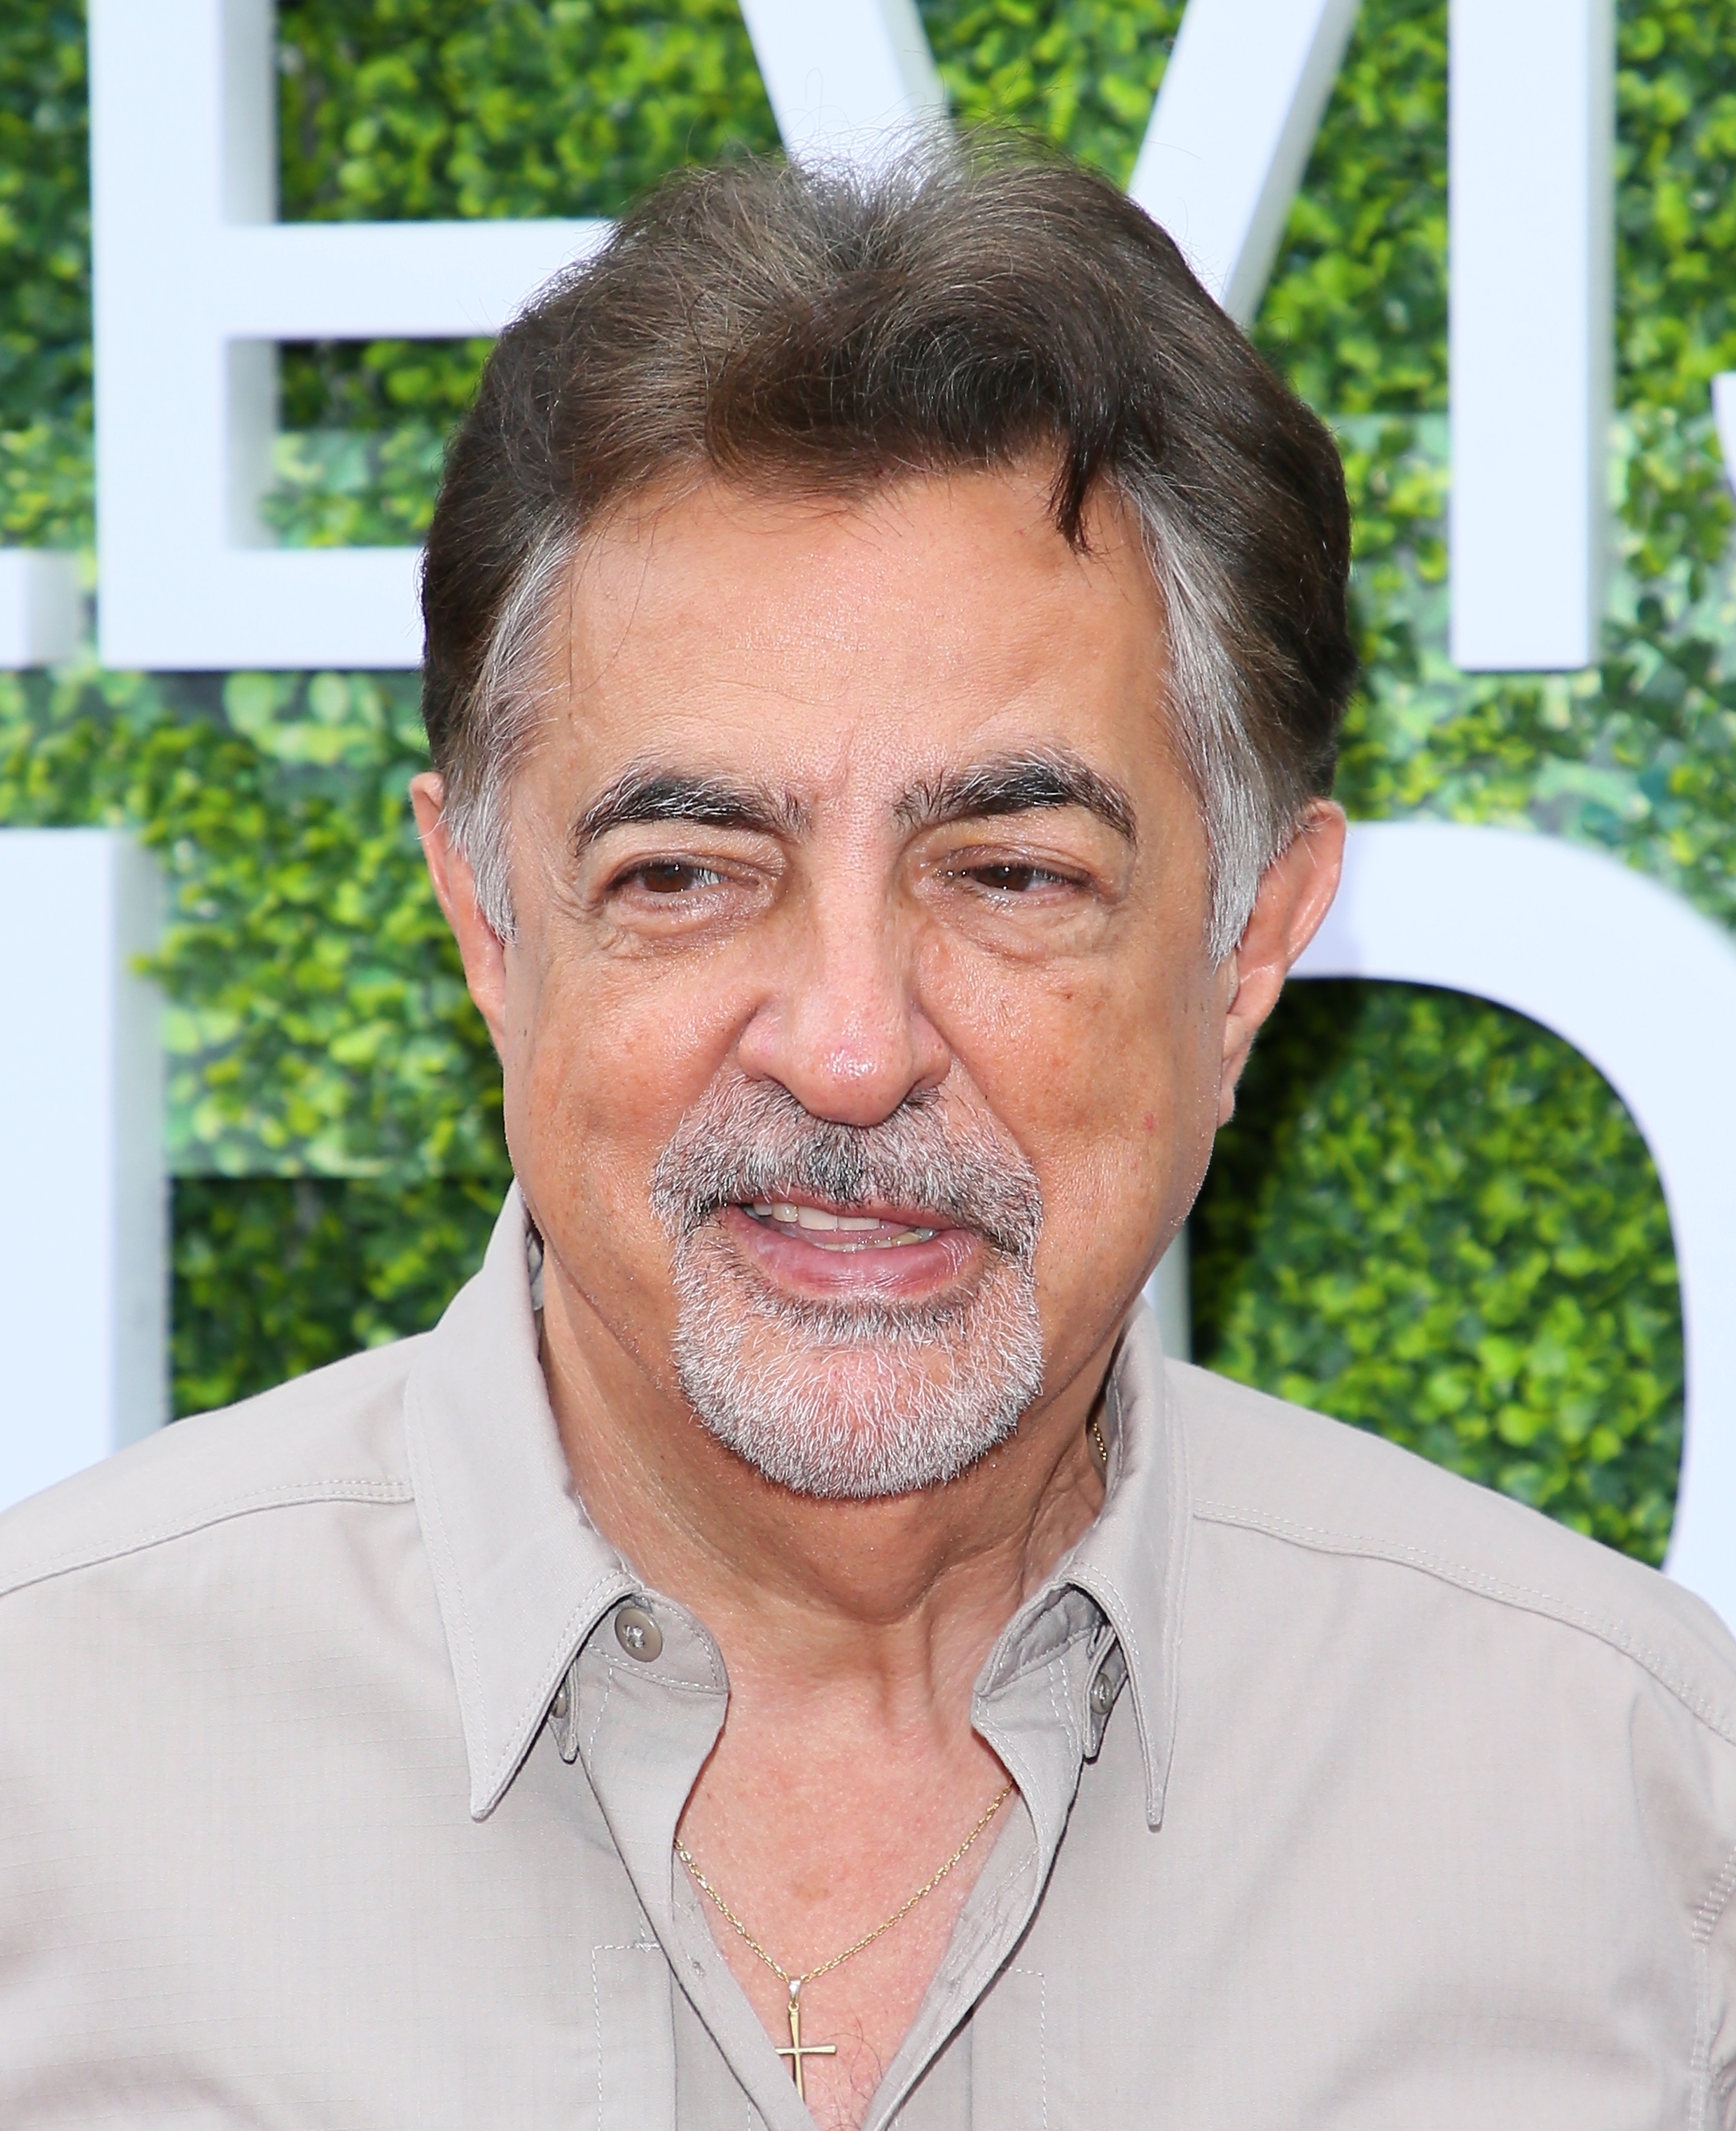 Joe Mantegna at the Summer TCA Tour in Studio City, California on August 1, 2017 | Source: Getty Images